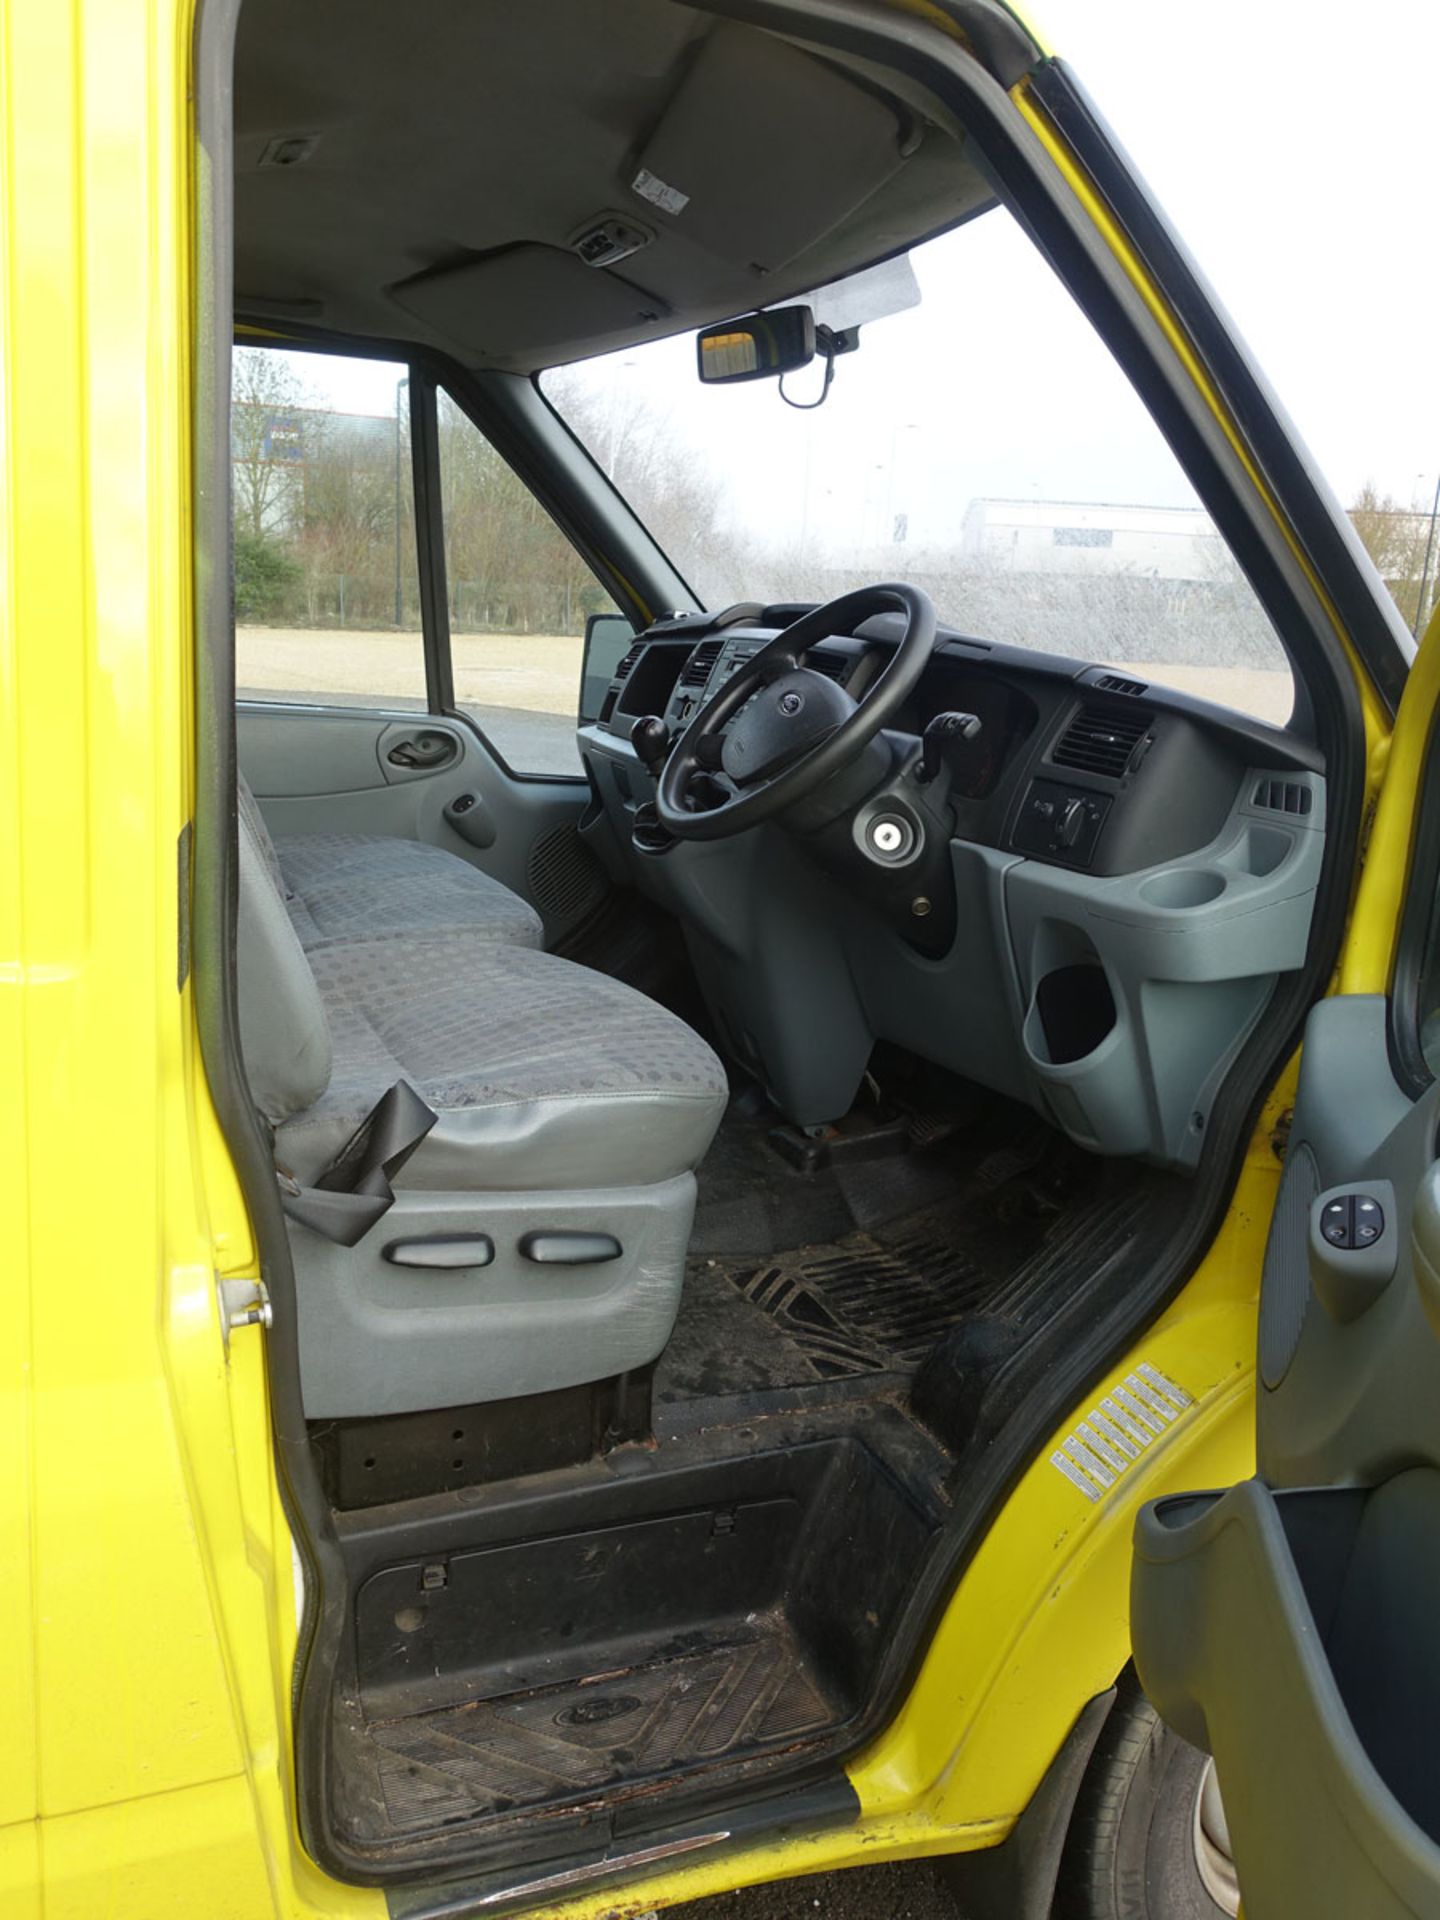 2010 Ford Transit Panel Van in yellow, 2402cc, key and V5 present, first registered 26,11,2010, 3 - Image 6 of 7